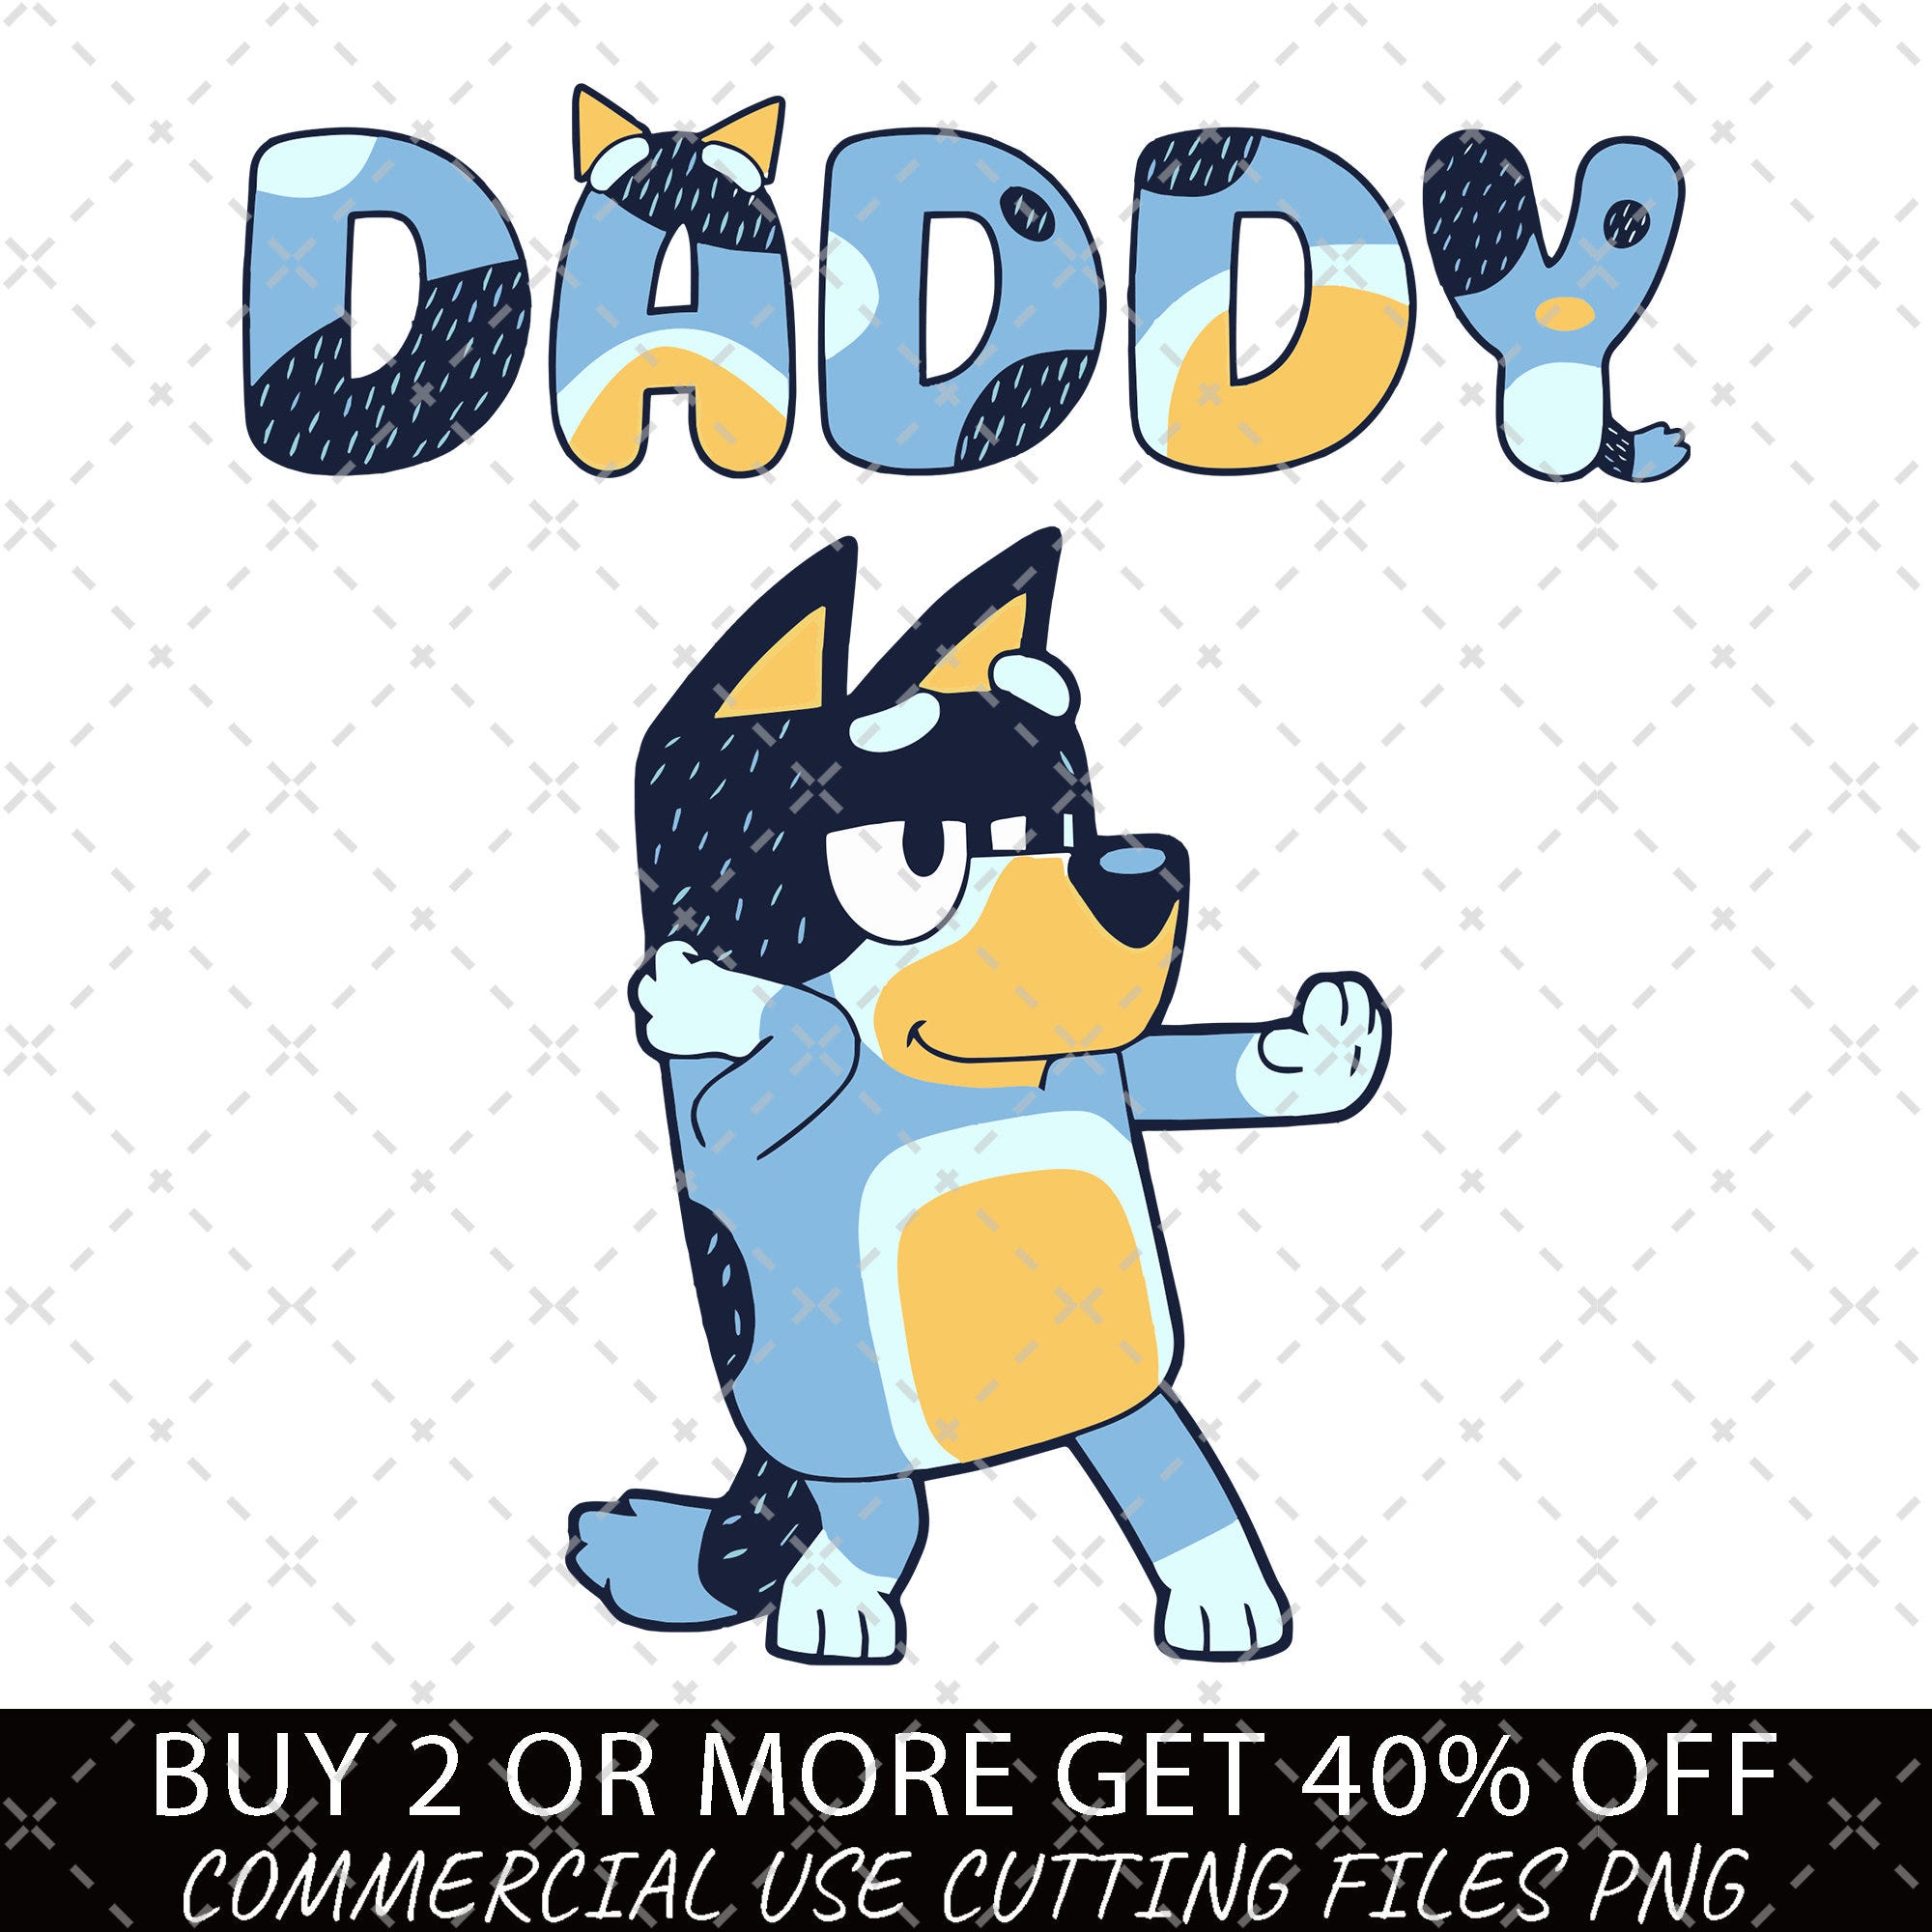 Bluey Daddy PNG, Bluey Family Png, Decal Files, Vinyl Stickers, Car Image, Bluey Dad PNG, Fathers Day Bluey Png, Bluey Fathers Day Gift